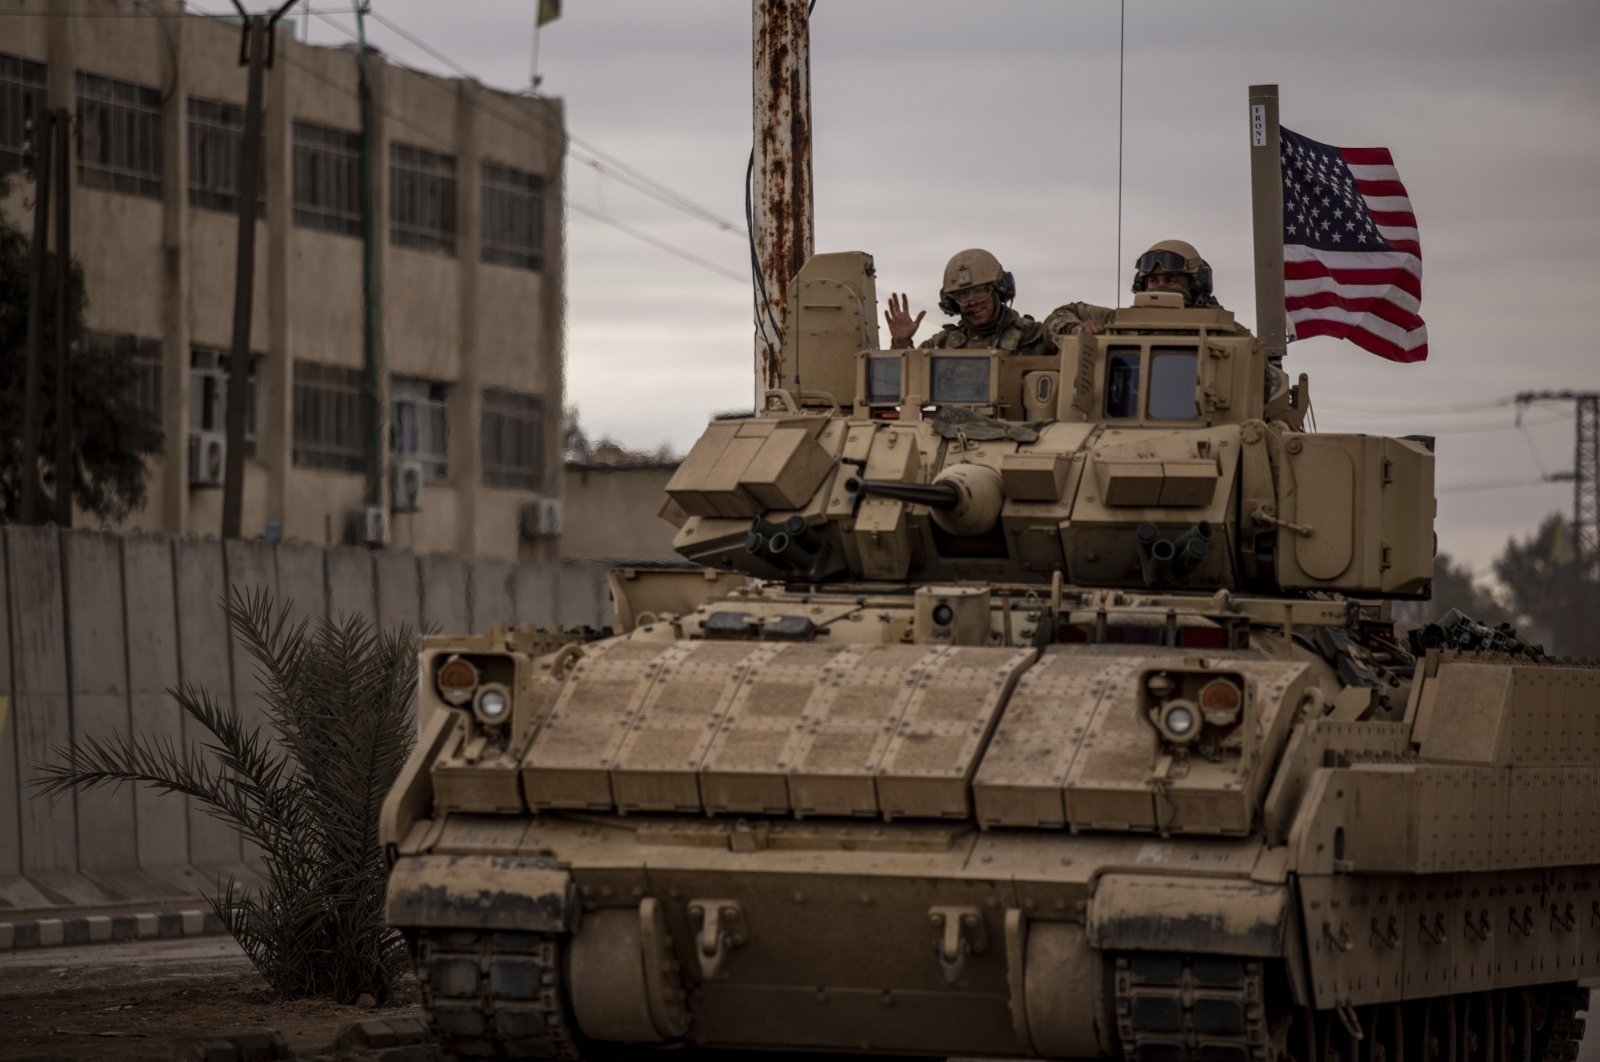 American soldiers patrol in Hassakeh, a town controlled by the PKK/YPG terrorist group, Syria, Feb. 8, 2022. (AP Photo)